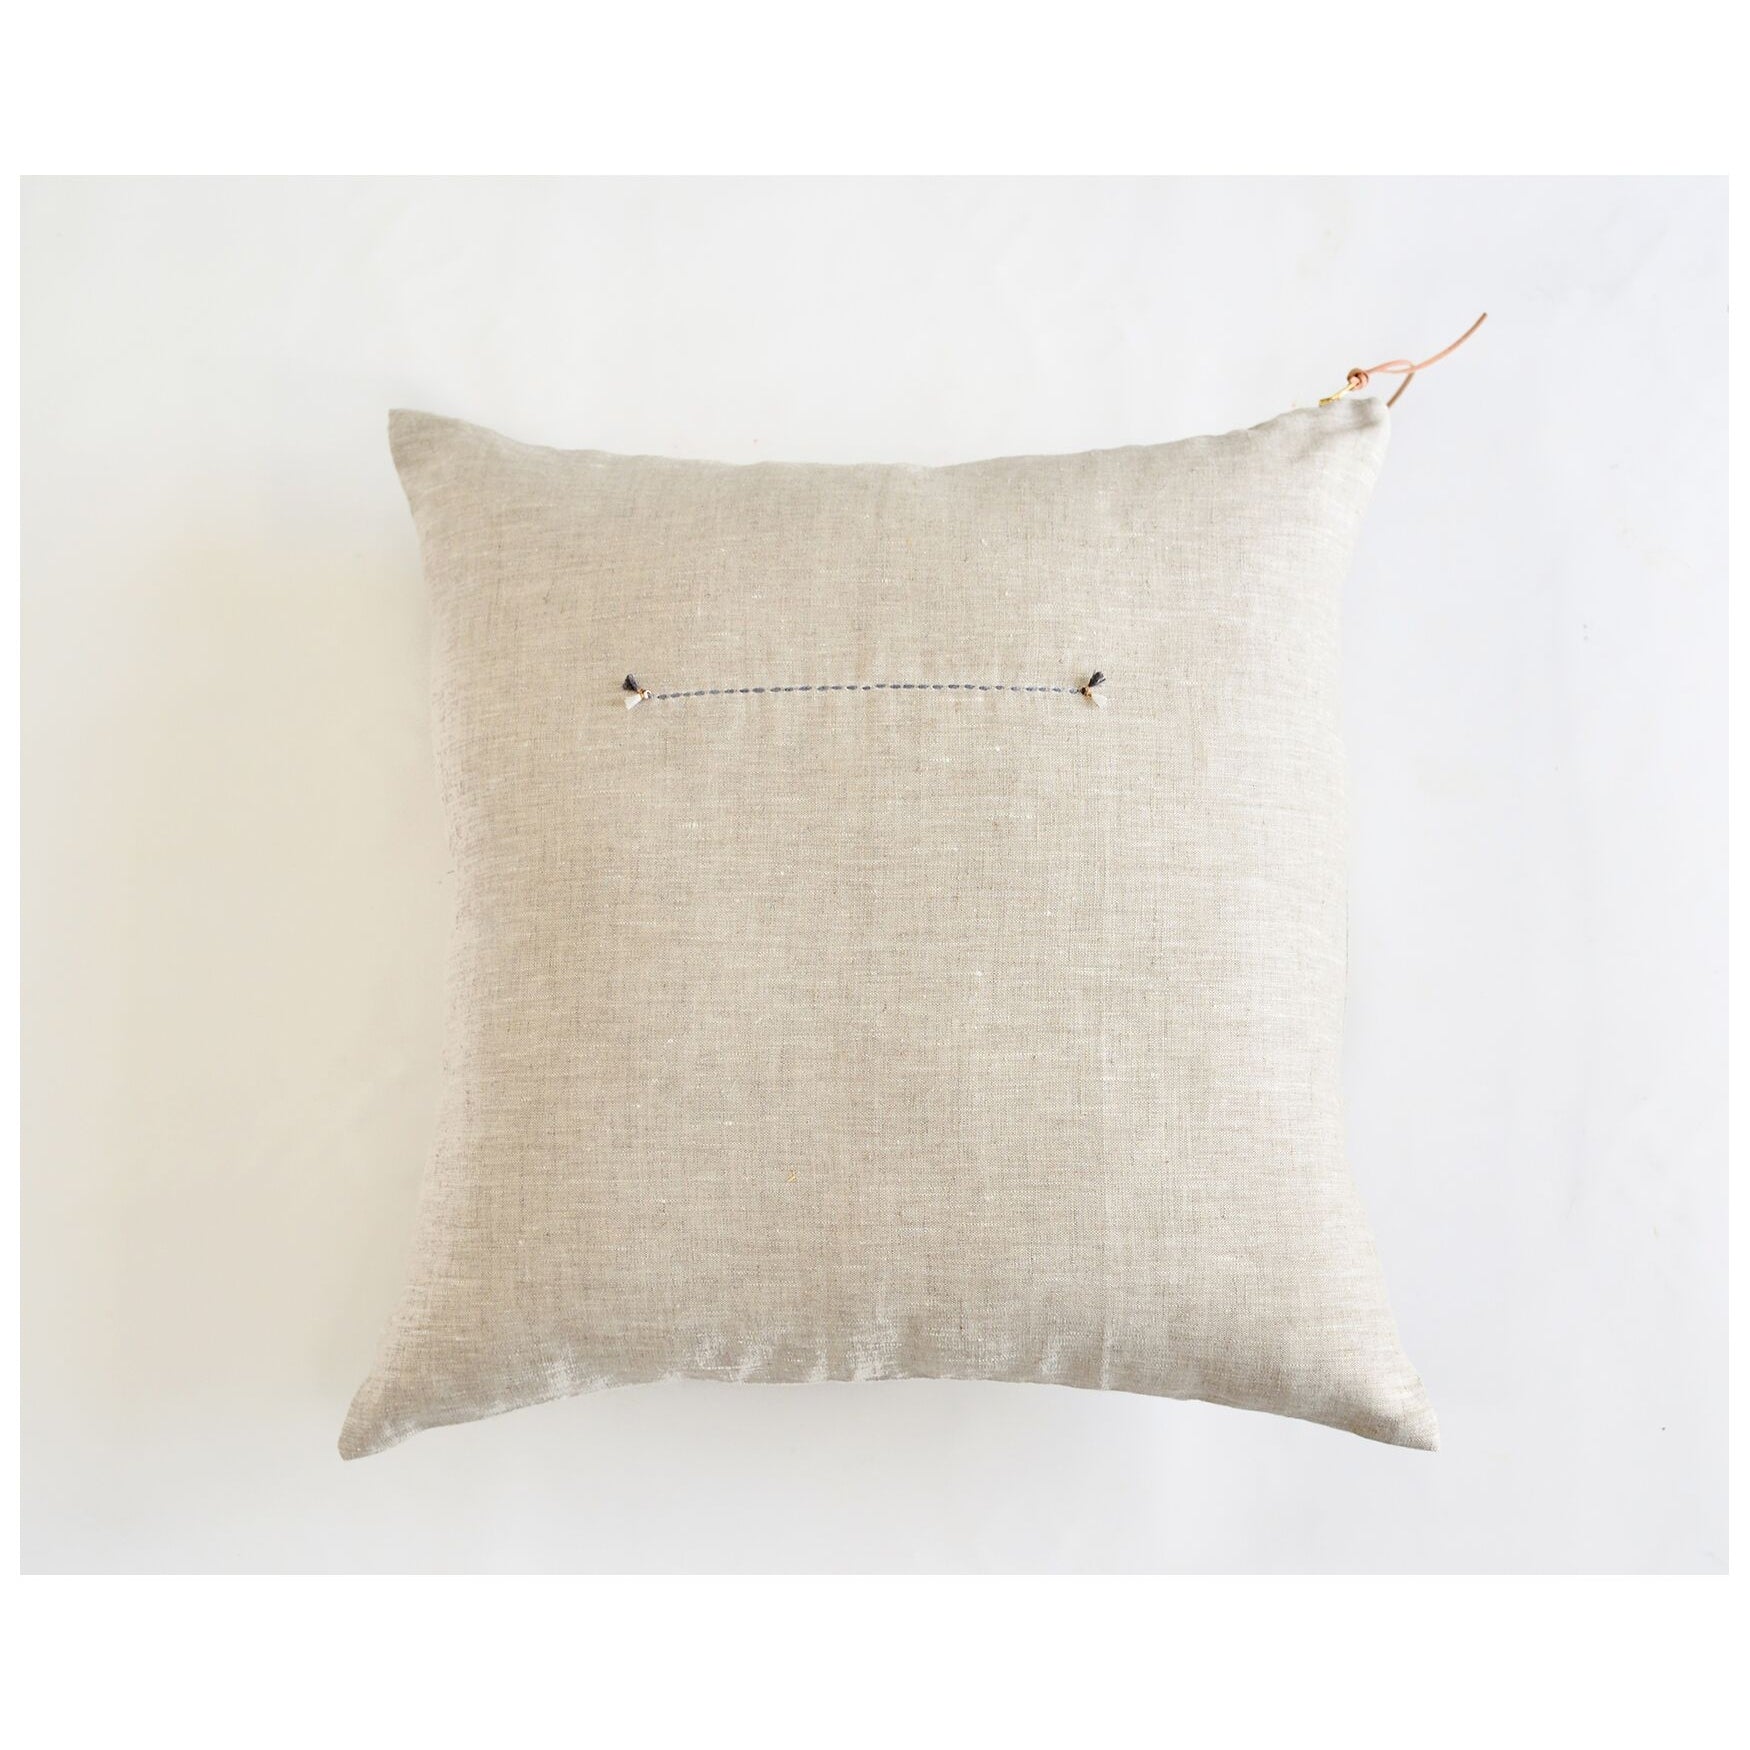 Celina Mancurt Linen pillow with leather pull